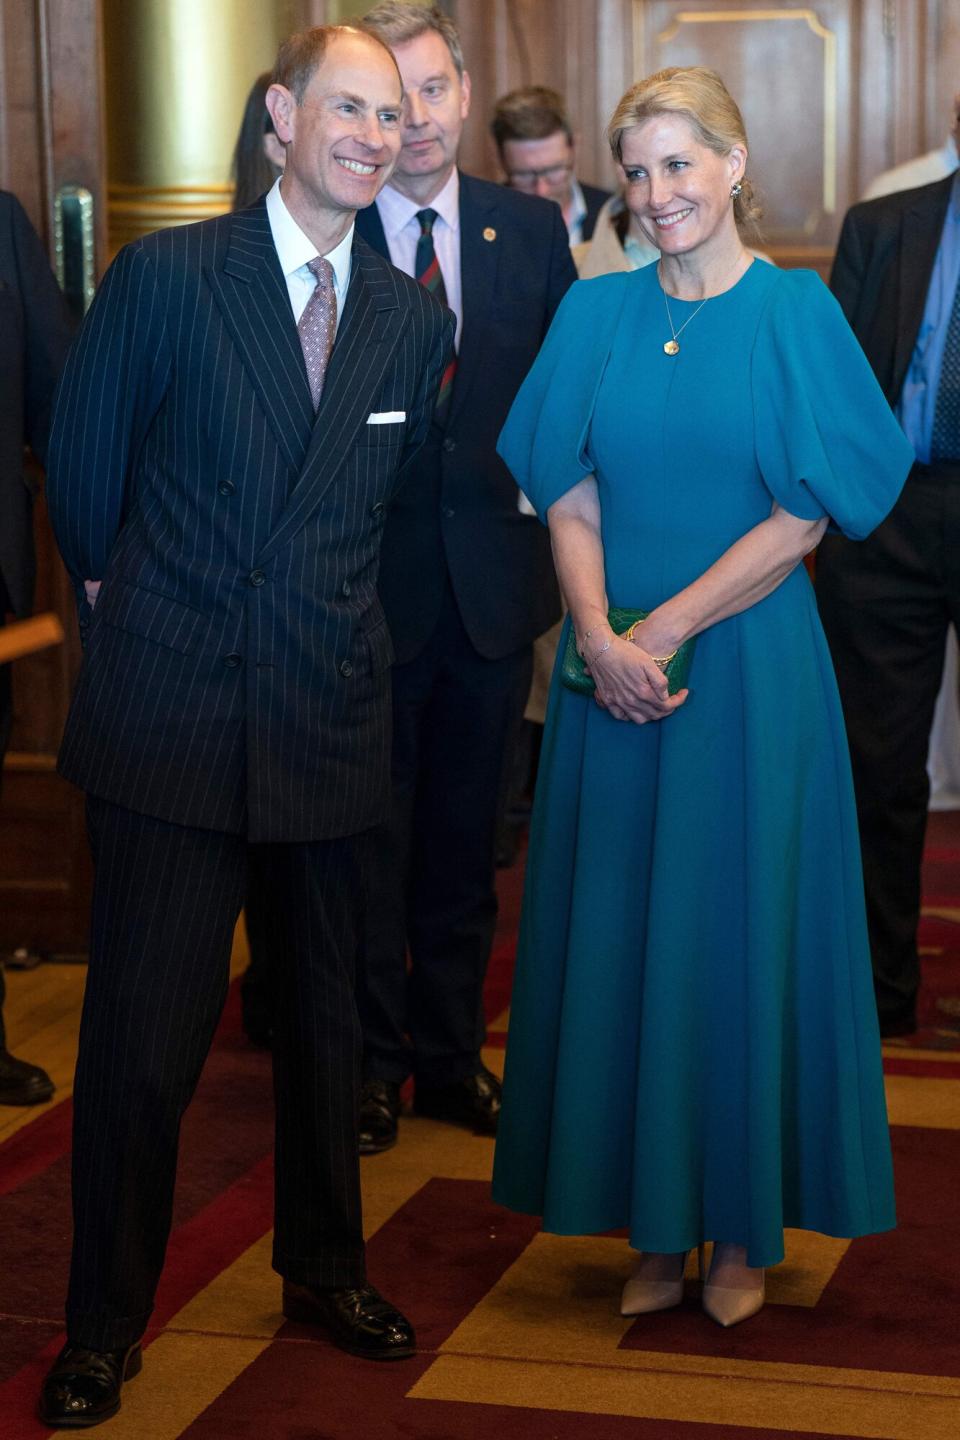 Britain's Prince Edward, Duke of Edinburgh (L) and Britain's Sophie, Duchess of Edinburgh (R) attend an event at the City Chambers in Edinburgh to mark one year since the city's formal response to the invasion of Ukraine on March 10, 2023. - Britain's King Charles III on Friday awarded his younger brother Edward the title Duke of Edinburgh, in line with the wishes of the late Queen Elizabeth II and her husband Prince Philip.